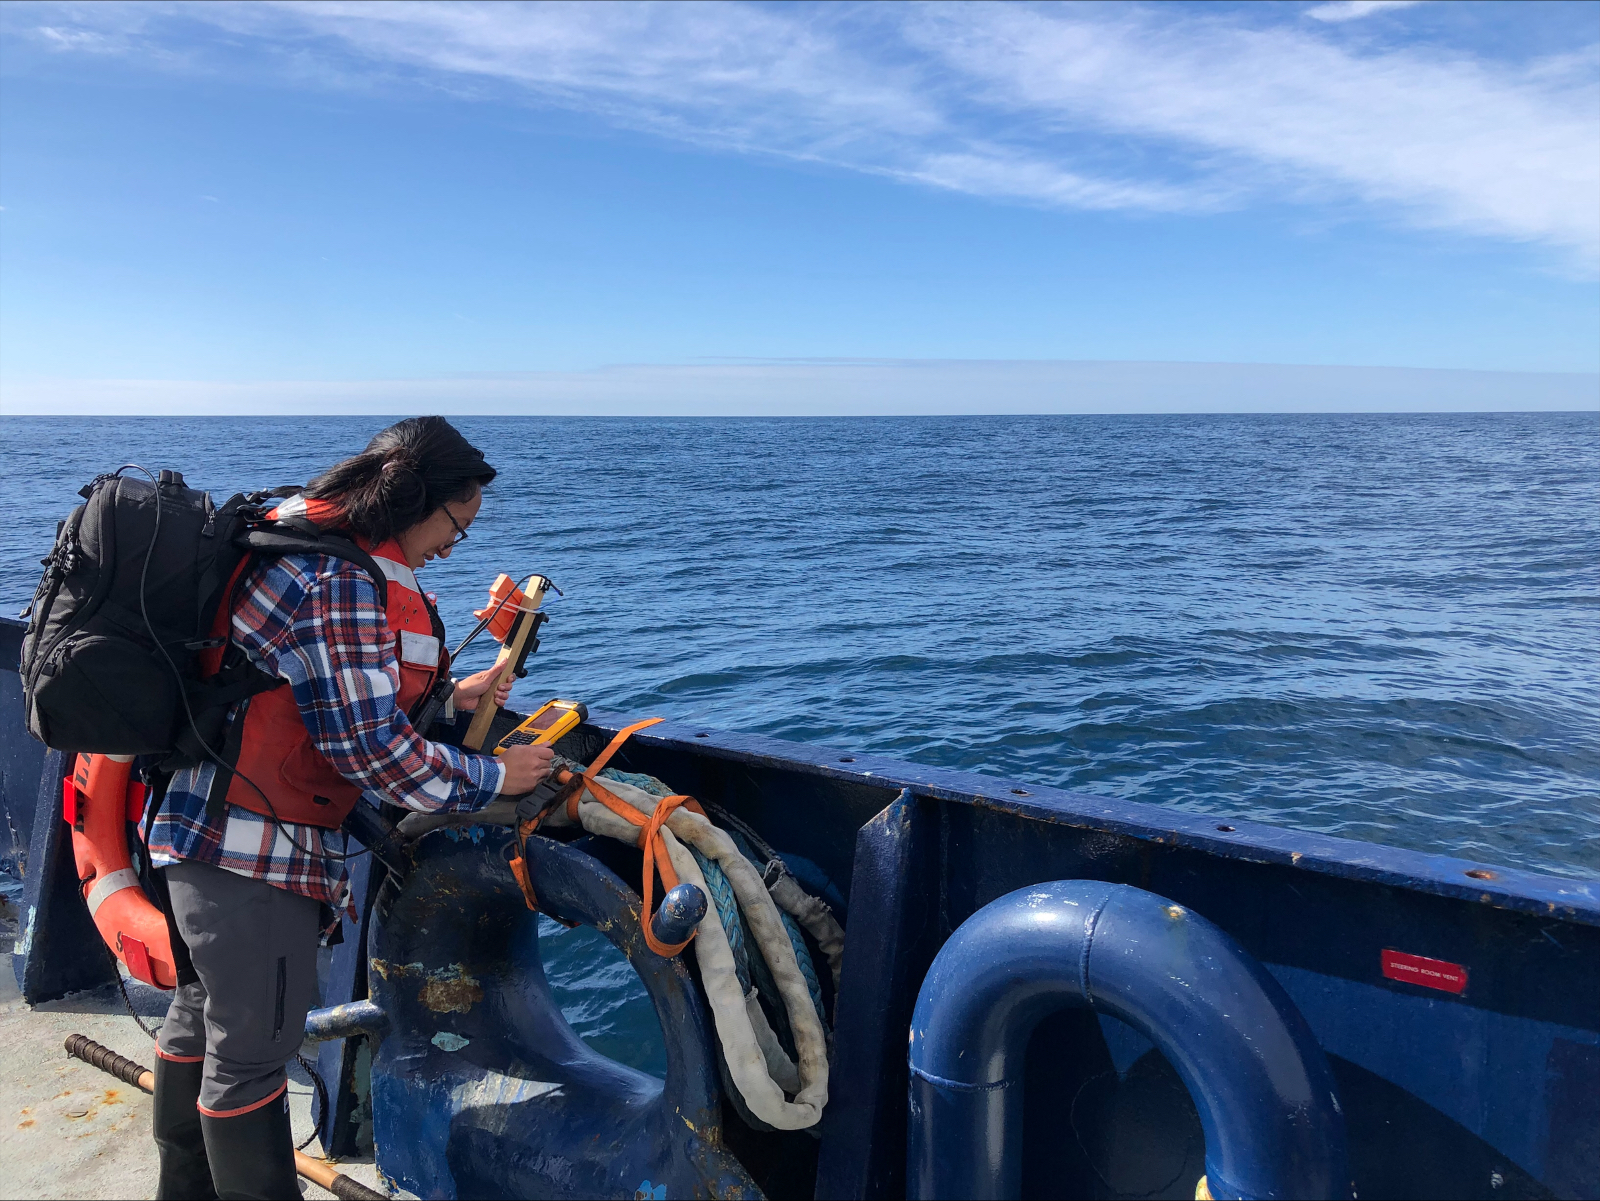 A field researcher stands at the edge of a boat overlooking the edge toward the ocean surface. She wears a backpack full of gear and holds an instrument facing the ocean.